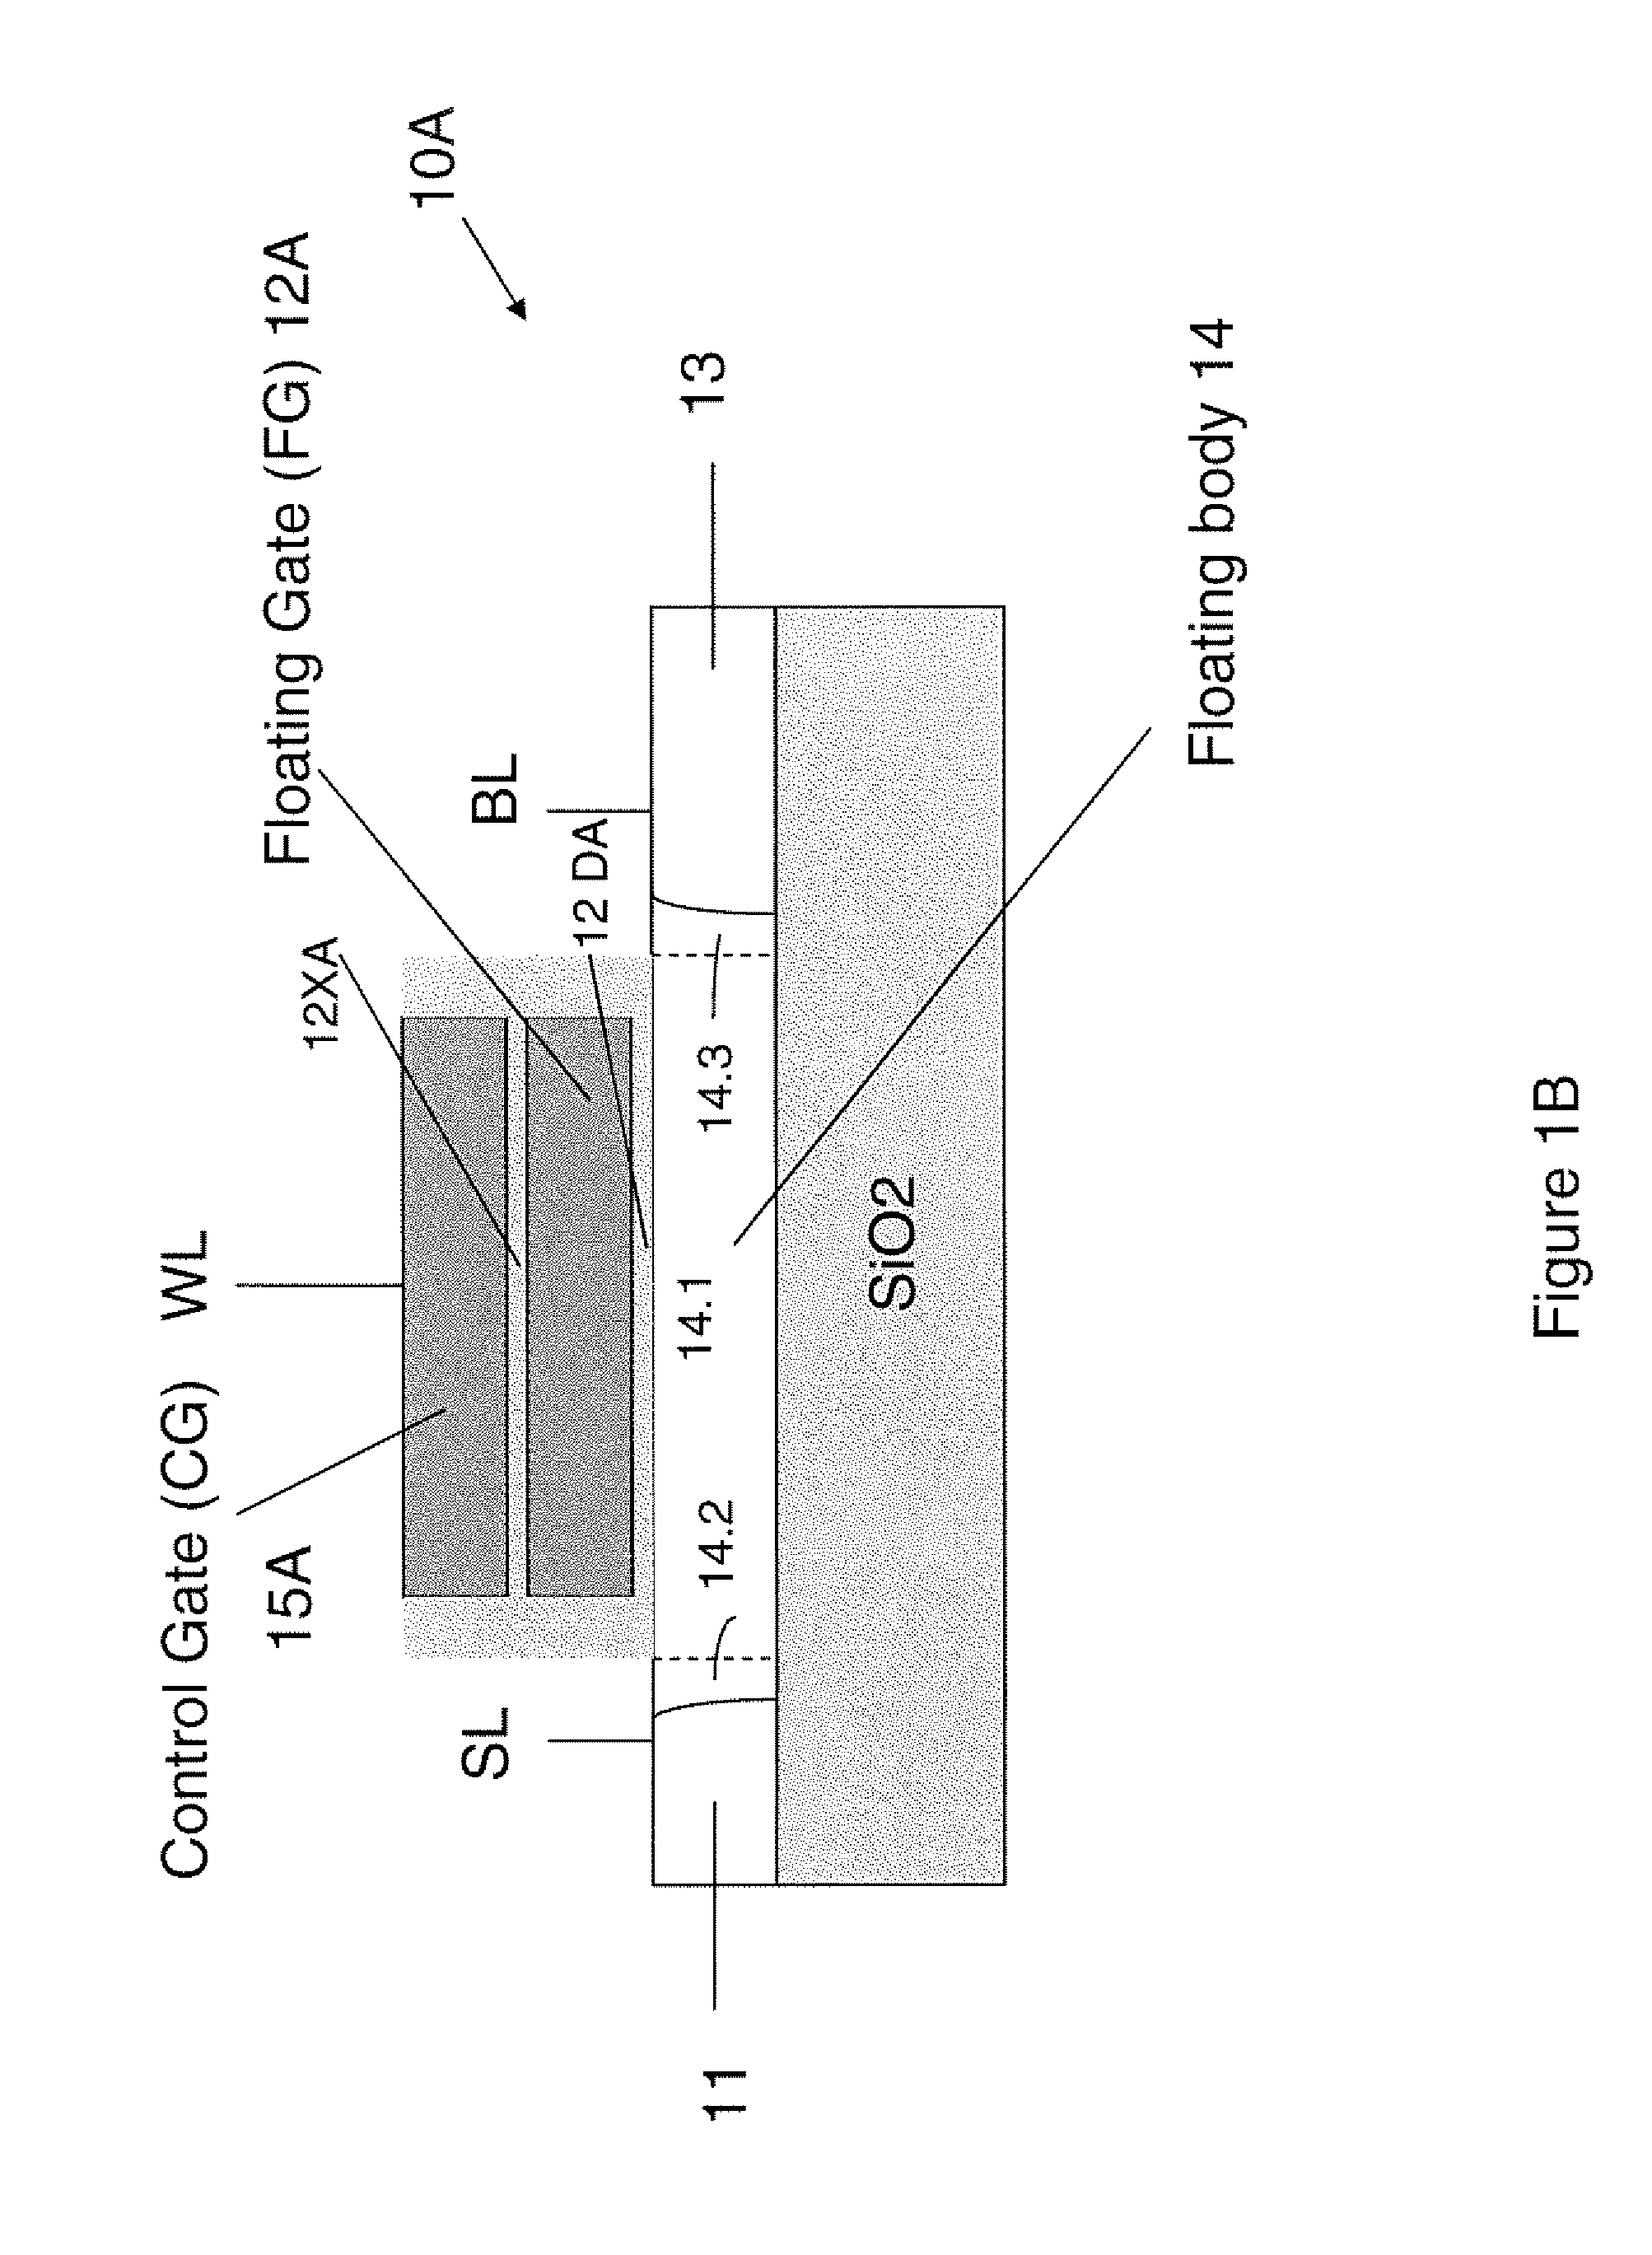 Semiconductor device with floating gate and electrically floating body